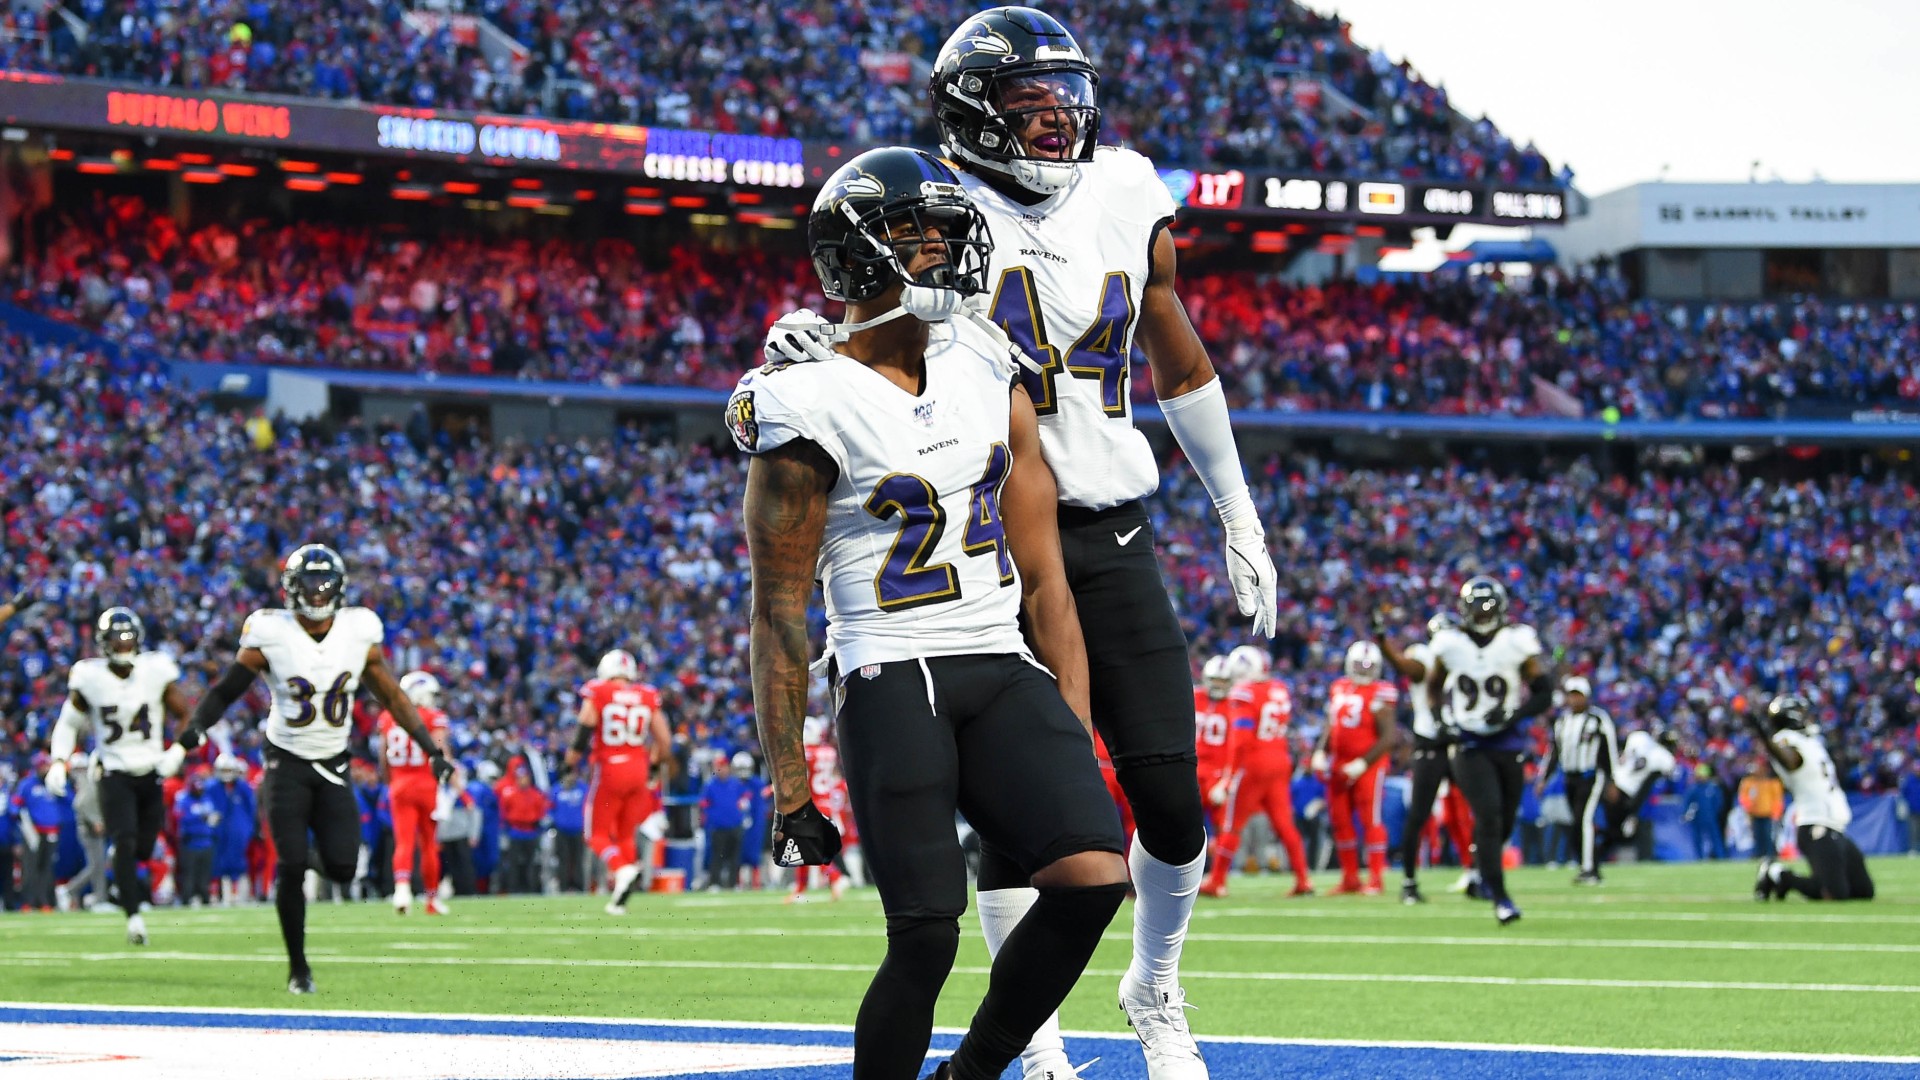 Marlon Humphrey and Marcus Peters Excited About Talented Cornerback Room in Baltimore